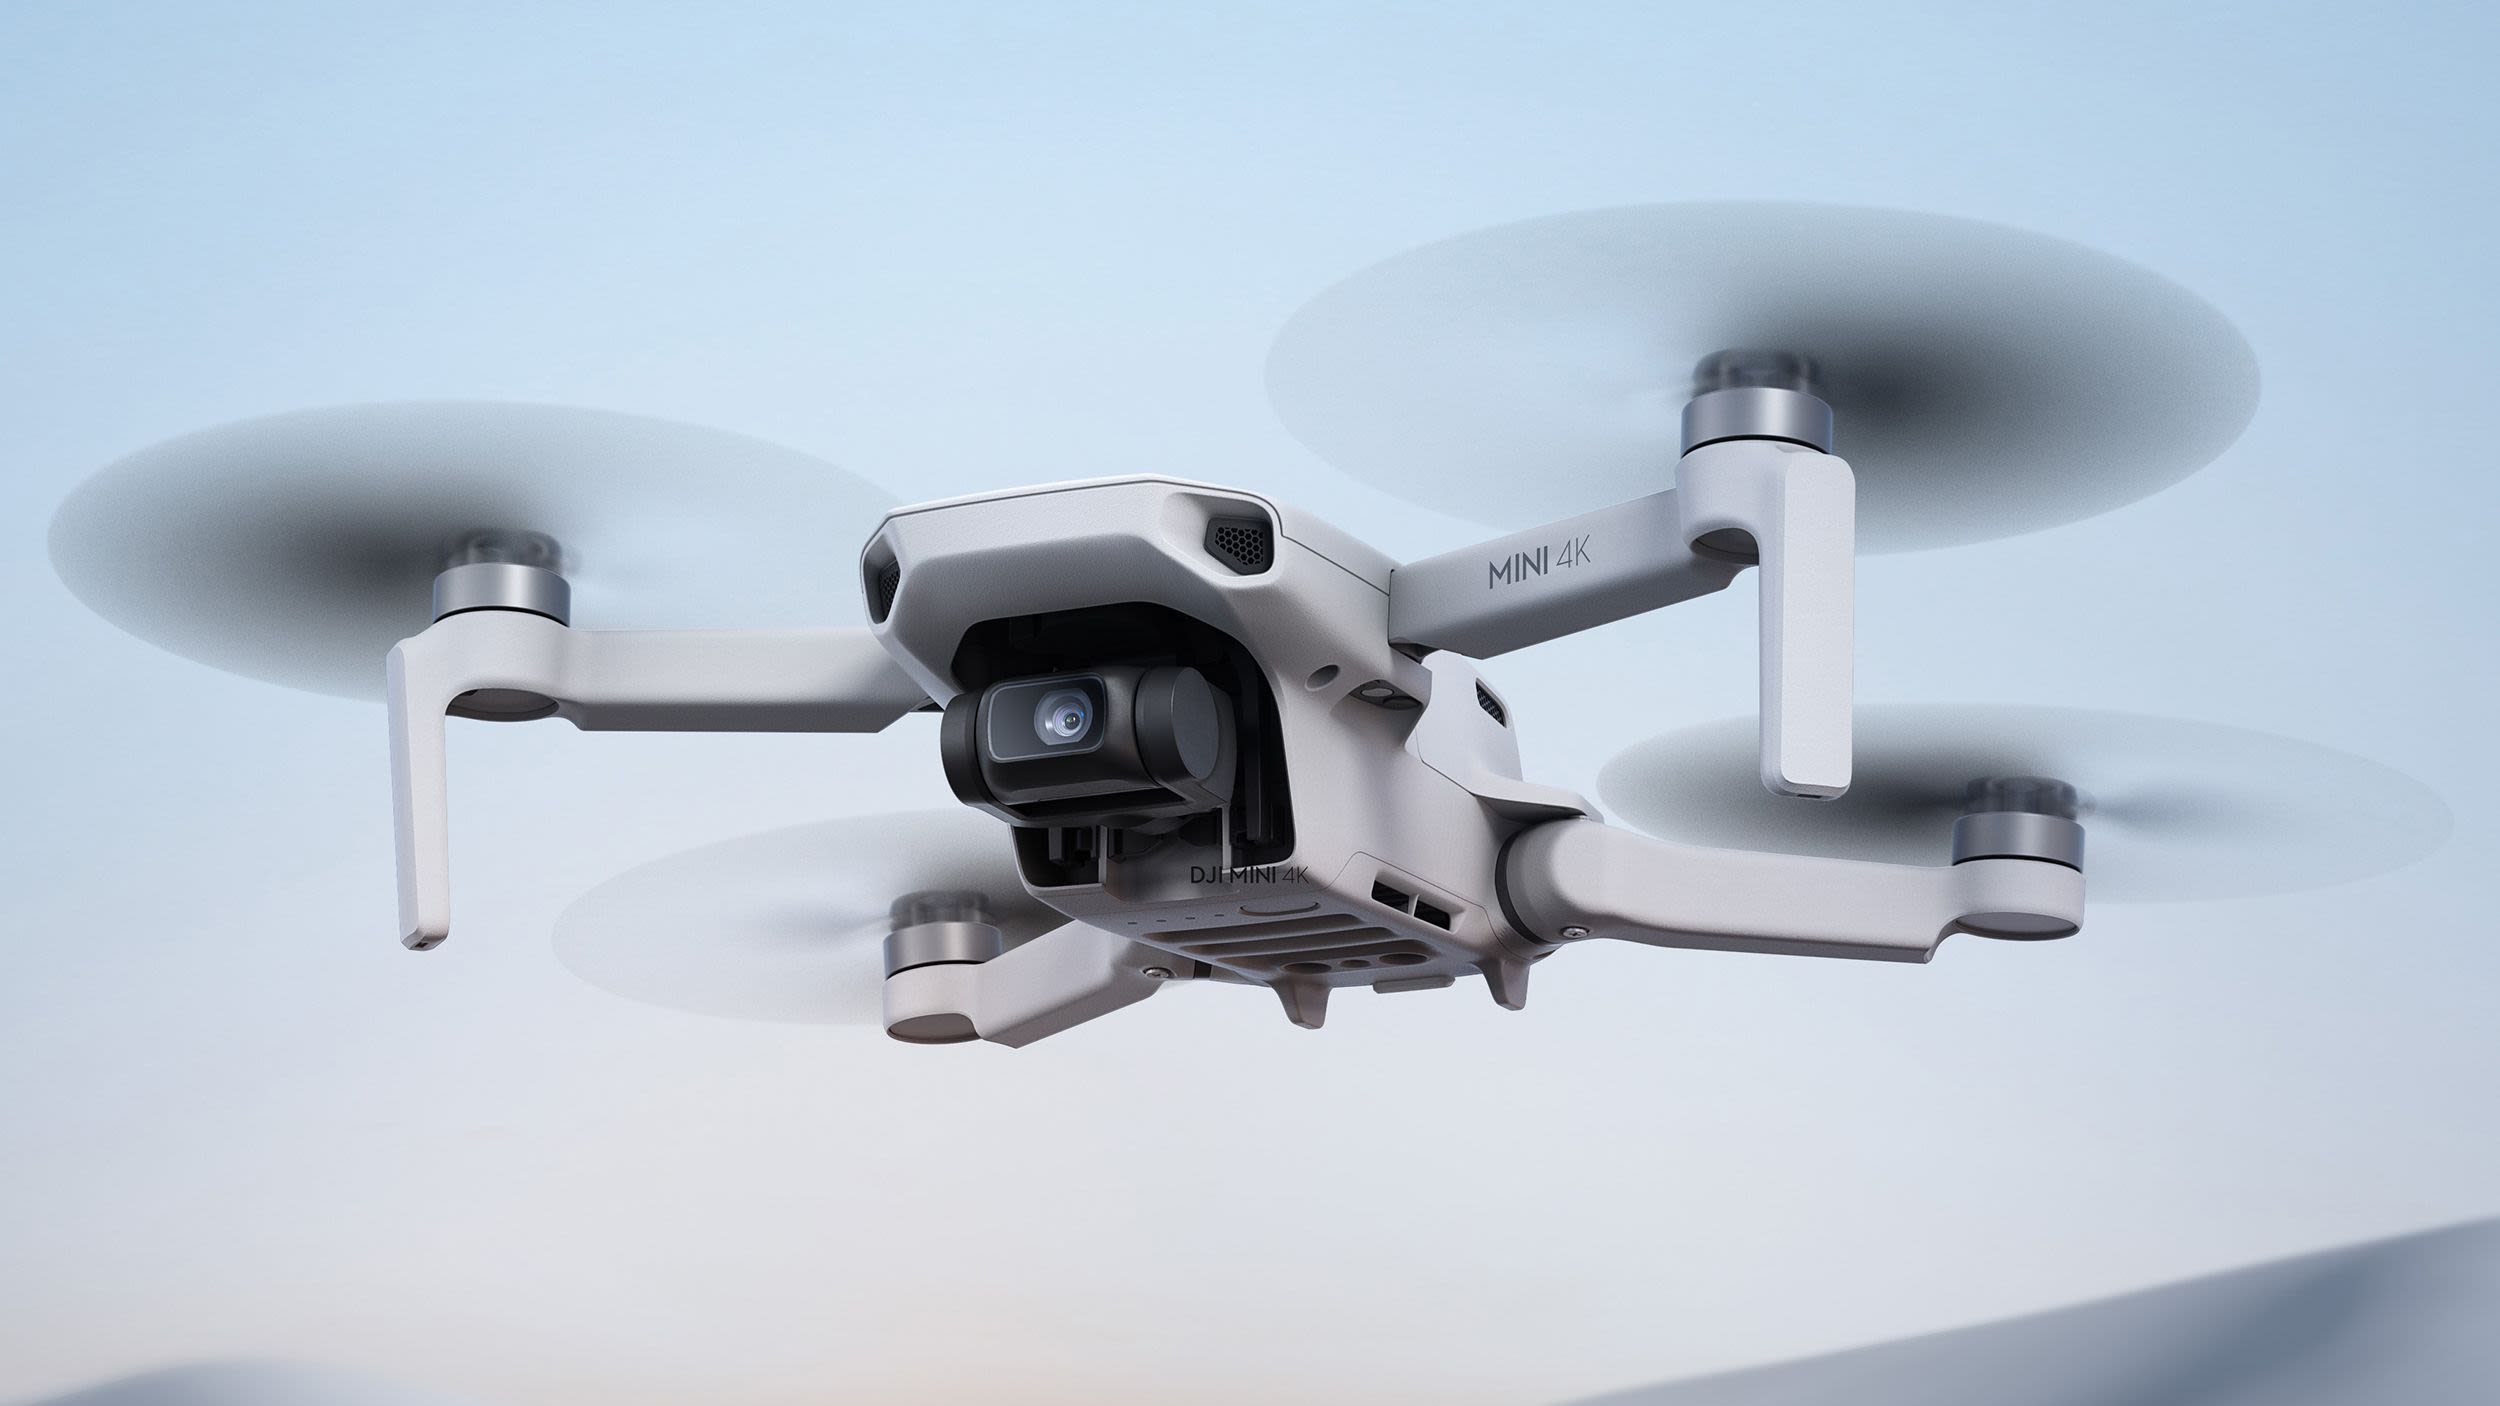 DJI quietly brings the beginner-friendly Mini 4K drone to the US